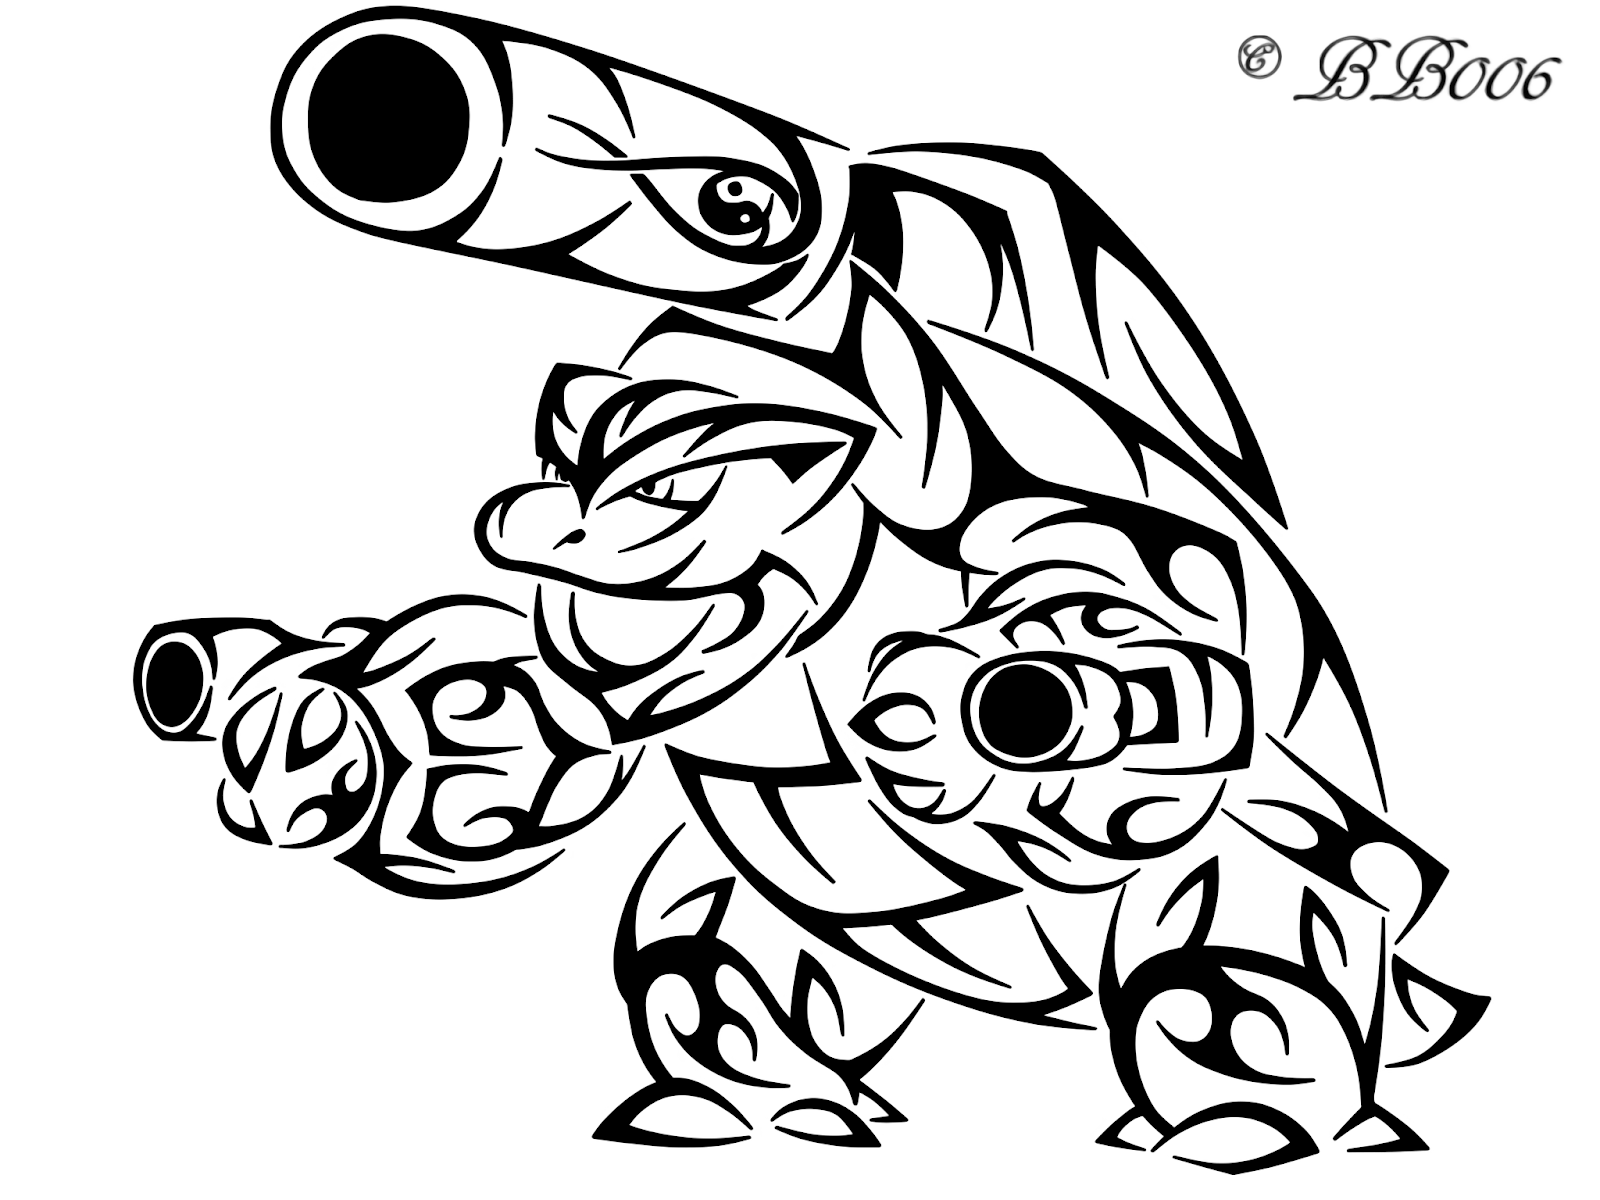 Free Blastoise  Coloring  Pages  Collection Free Pokemon  